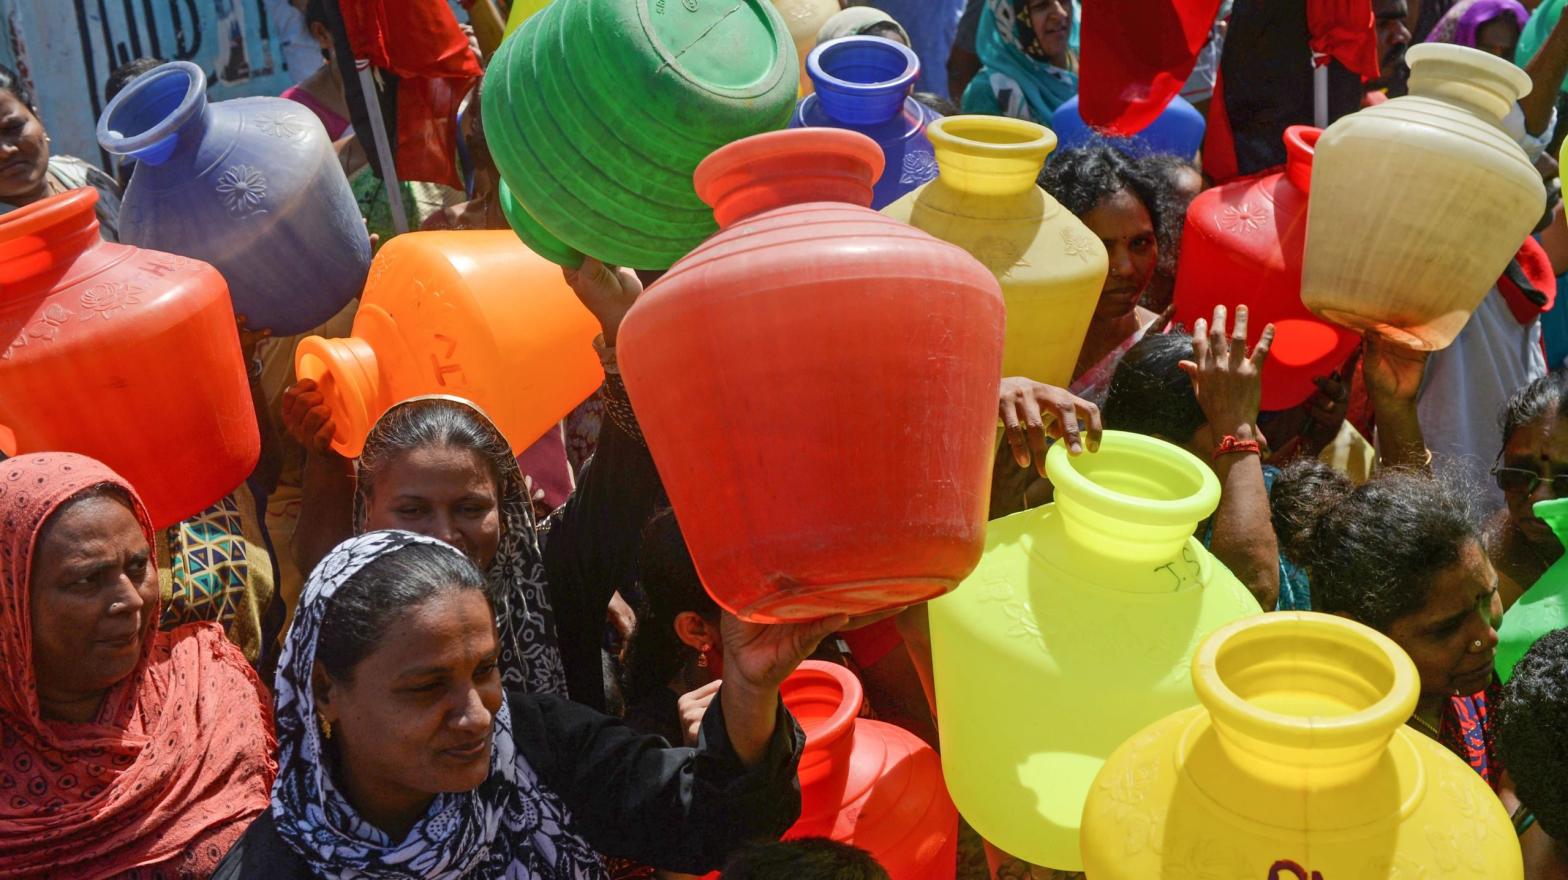 Indian women with empty plastic pots protest as they demand drinking water in Chennai on June 22, 2019. (Photo: Arun Sankar, Getty Images)